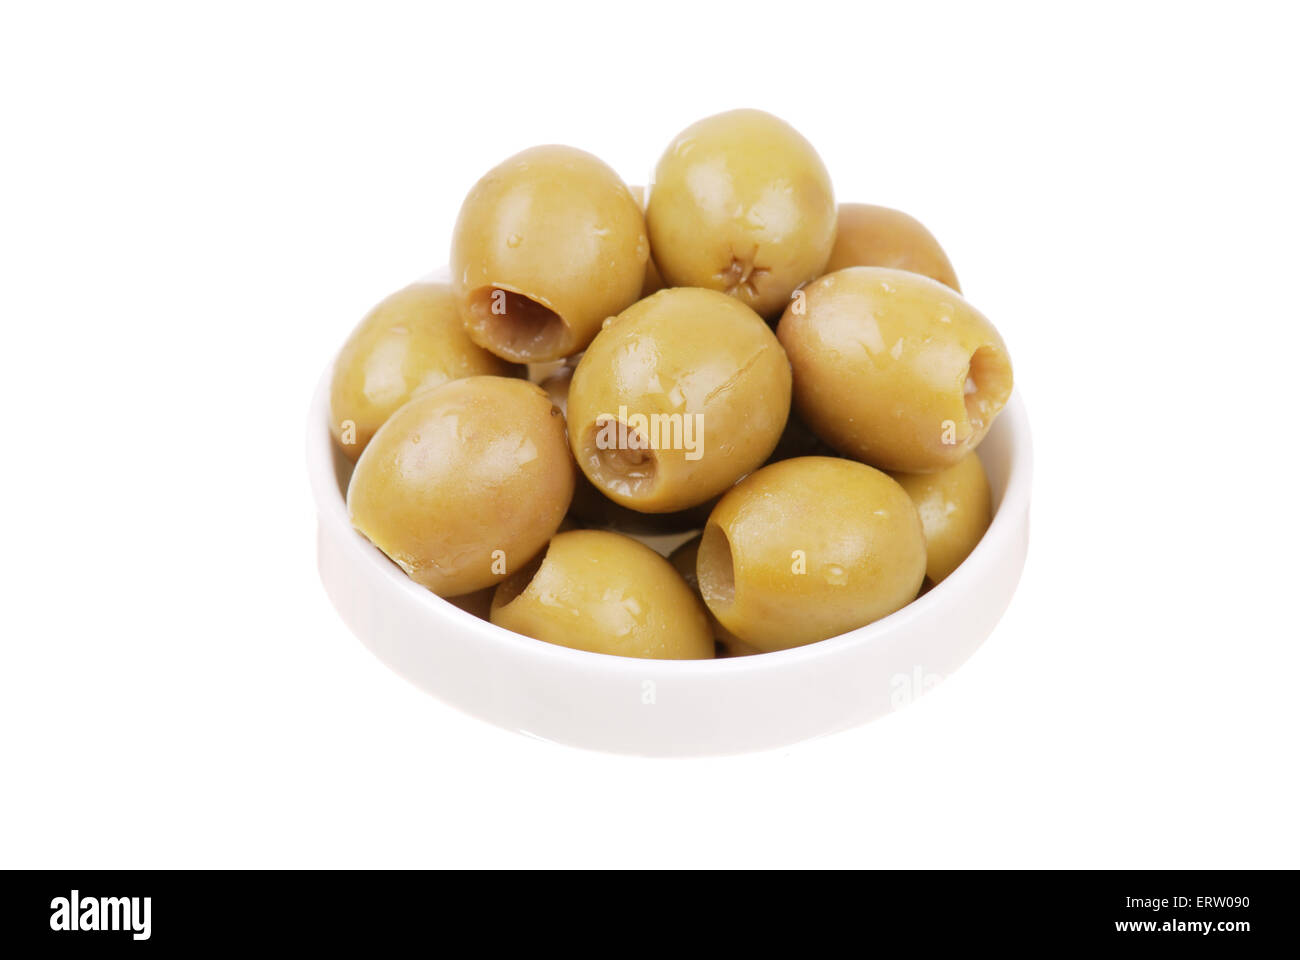 Green olives on a white plate isolated Stock Photo